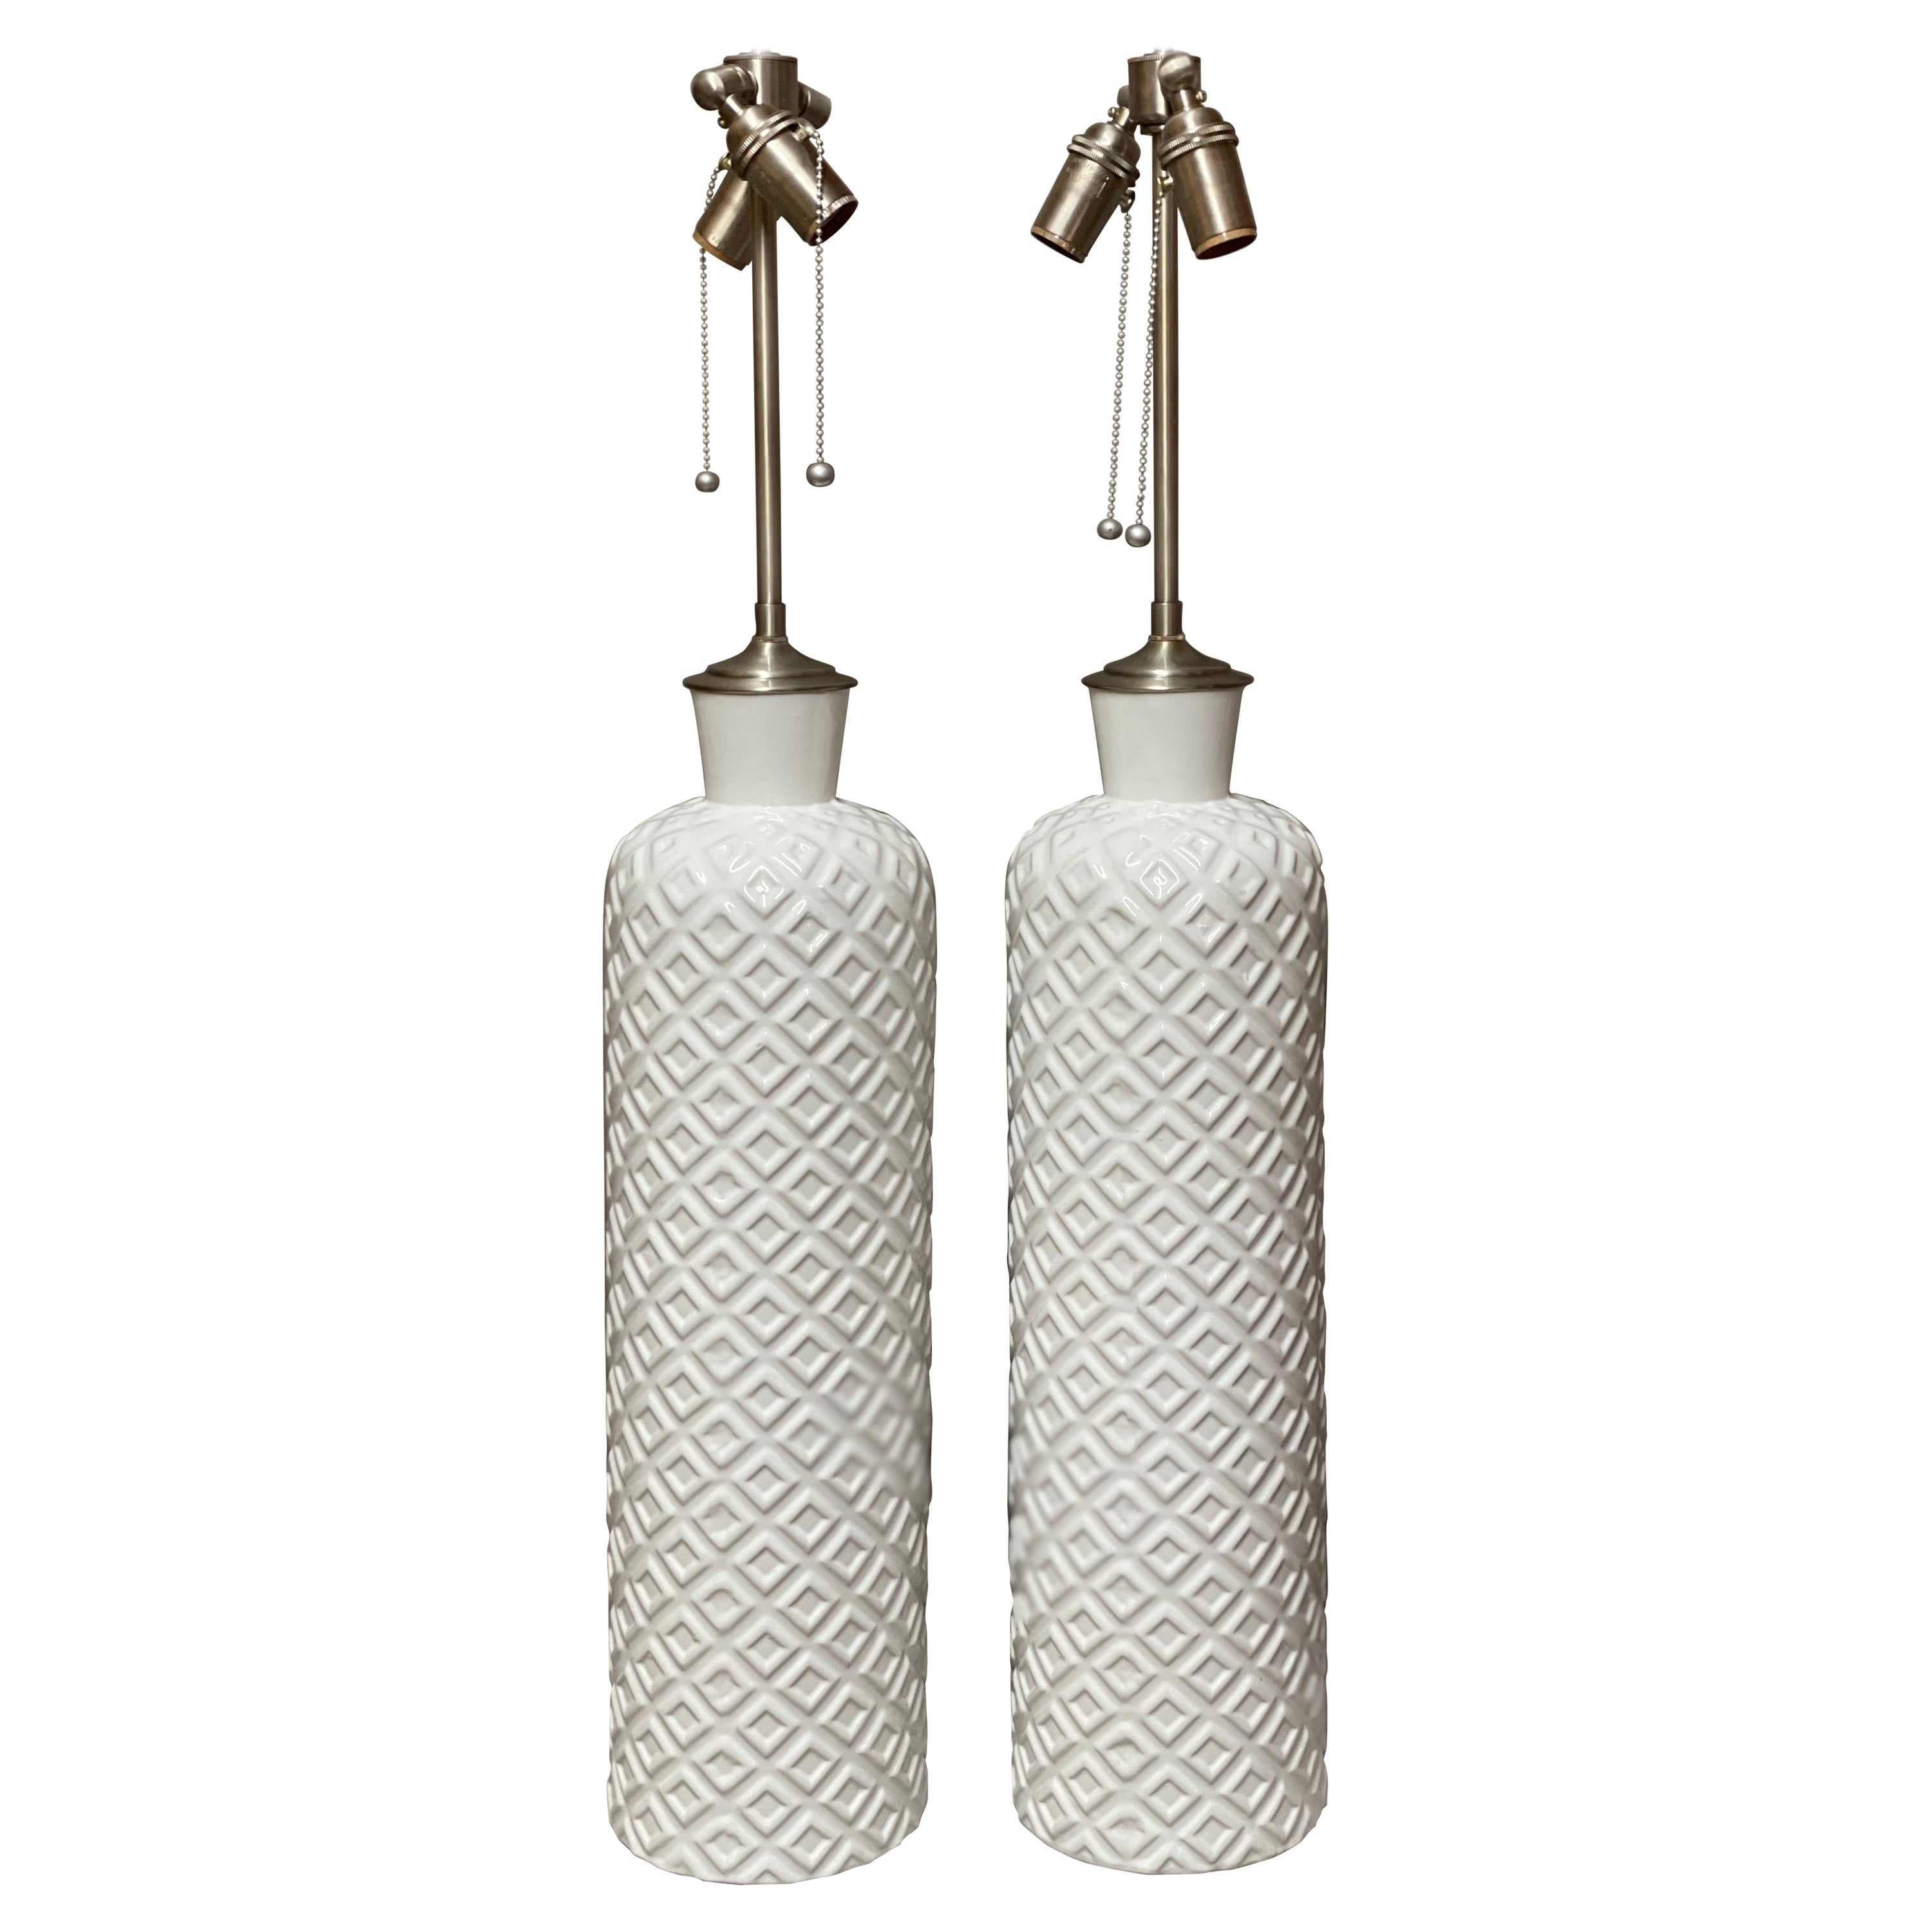 Pair of Great Tall Chic Embossed Ceramic White Vessels with Lamp Application